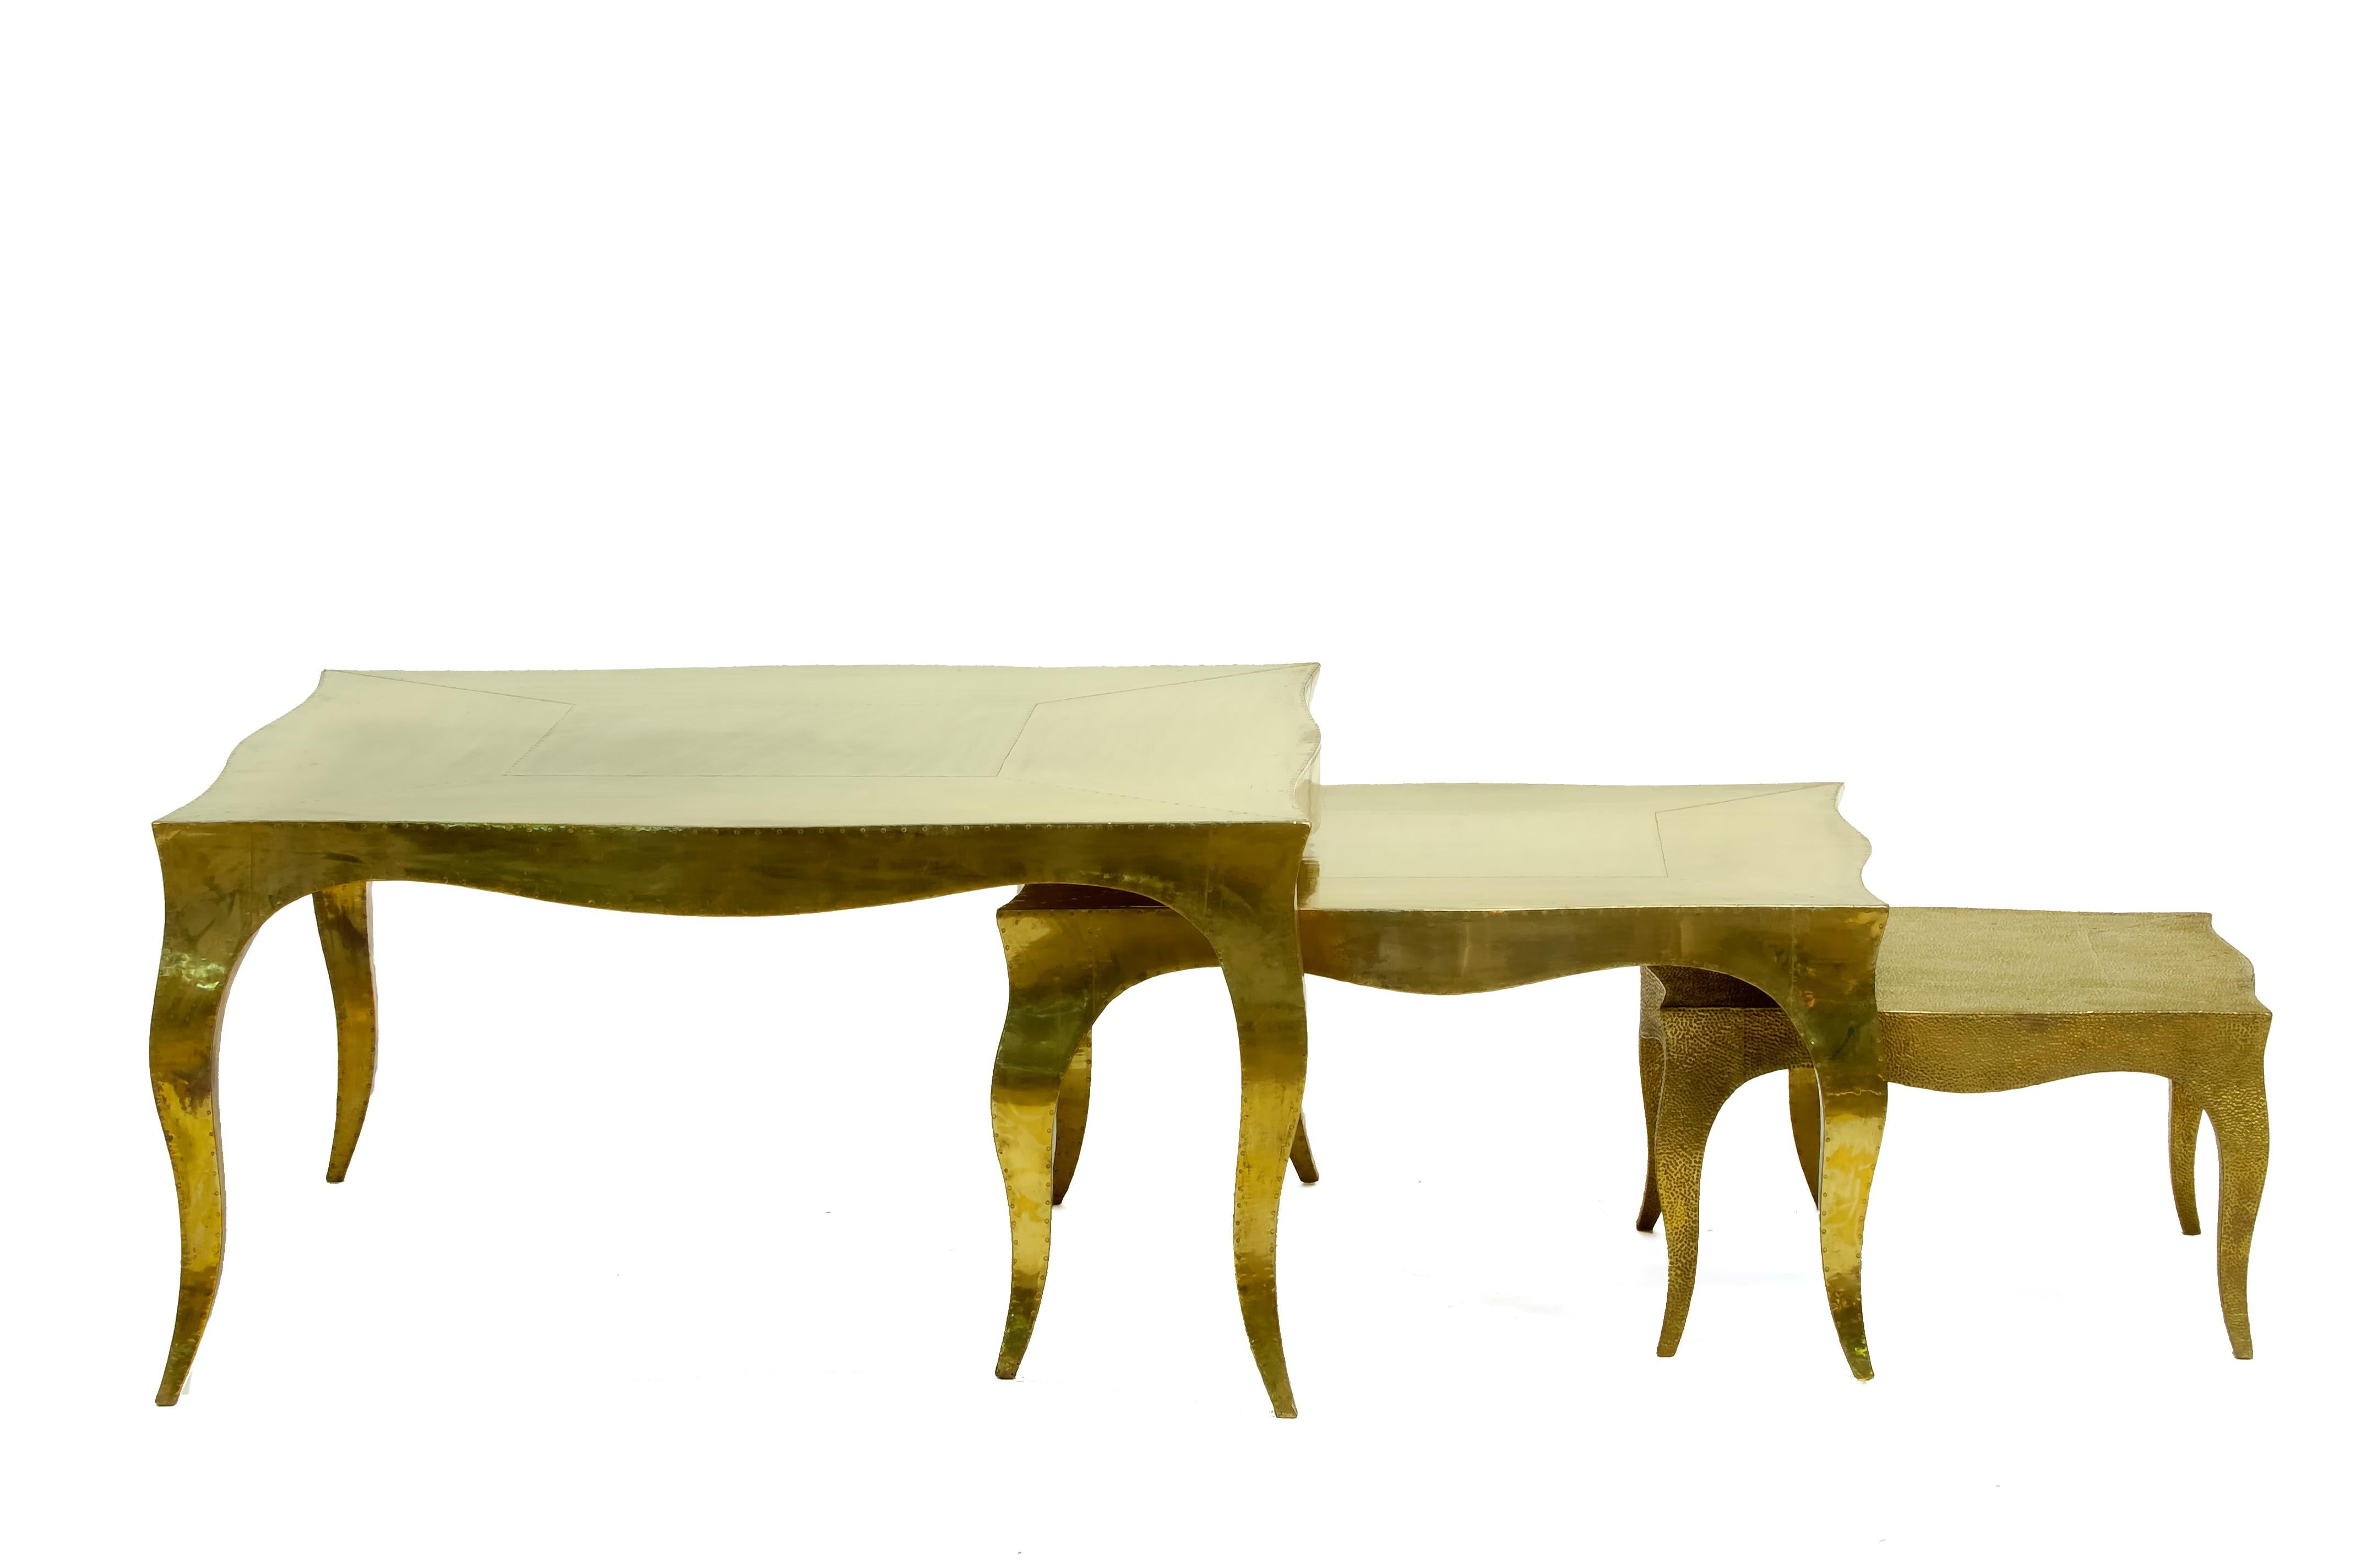 Louise Art Deco Industrial and Work Tables Mid. Hammered Brass by Paul Mathieu For Sale 7